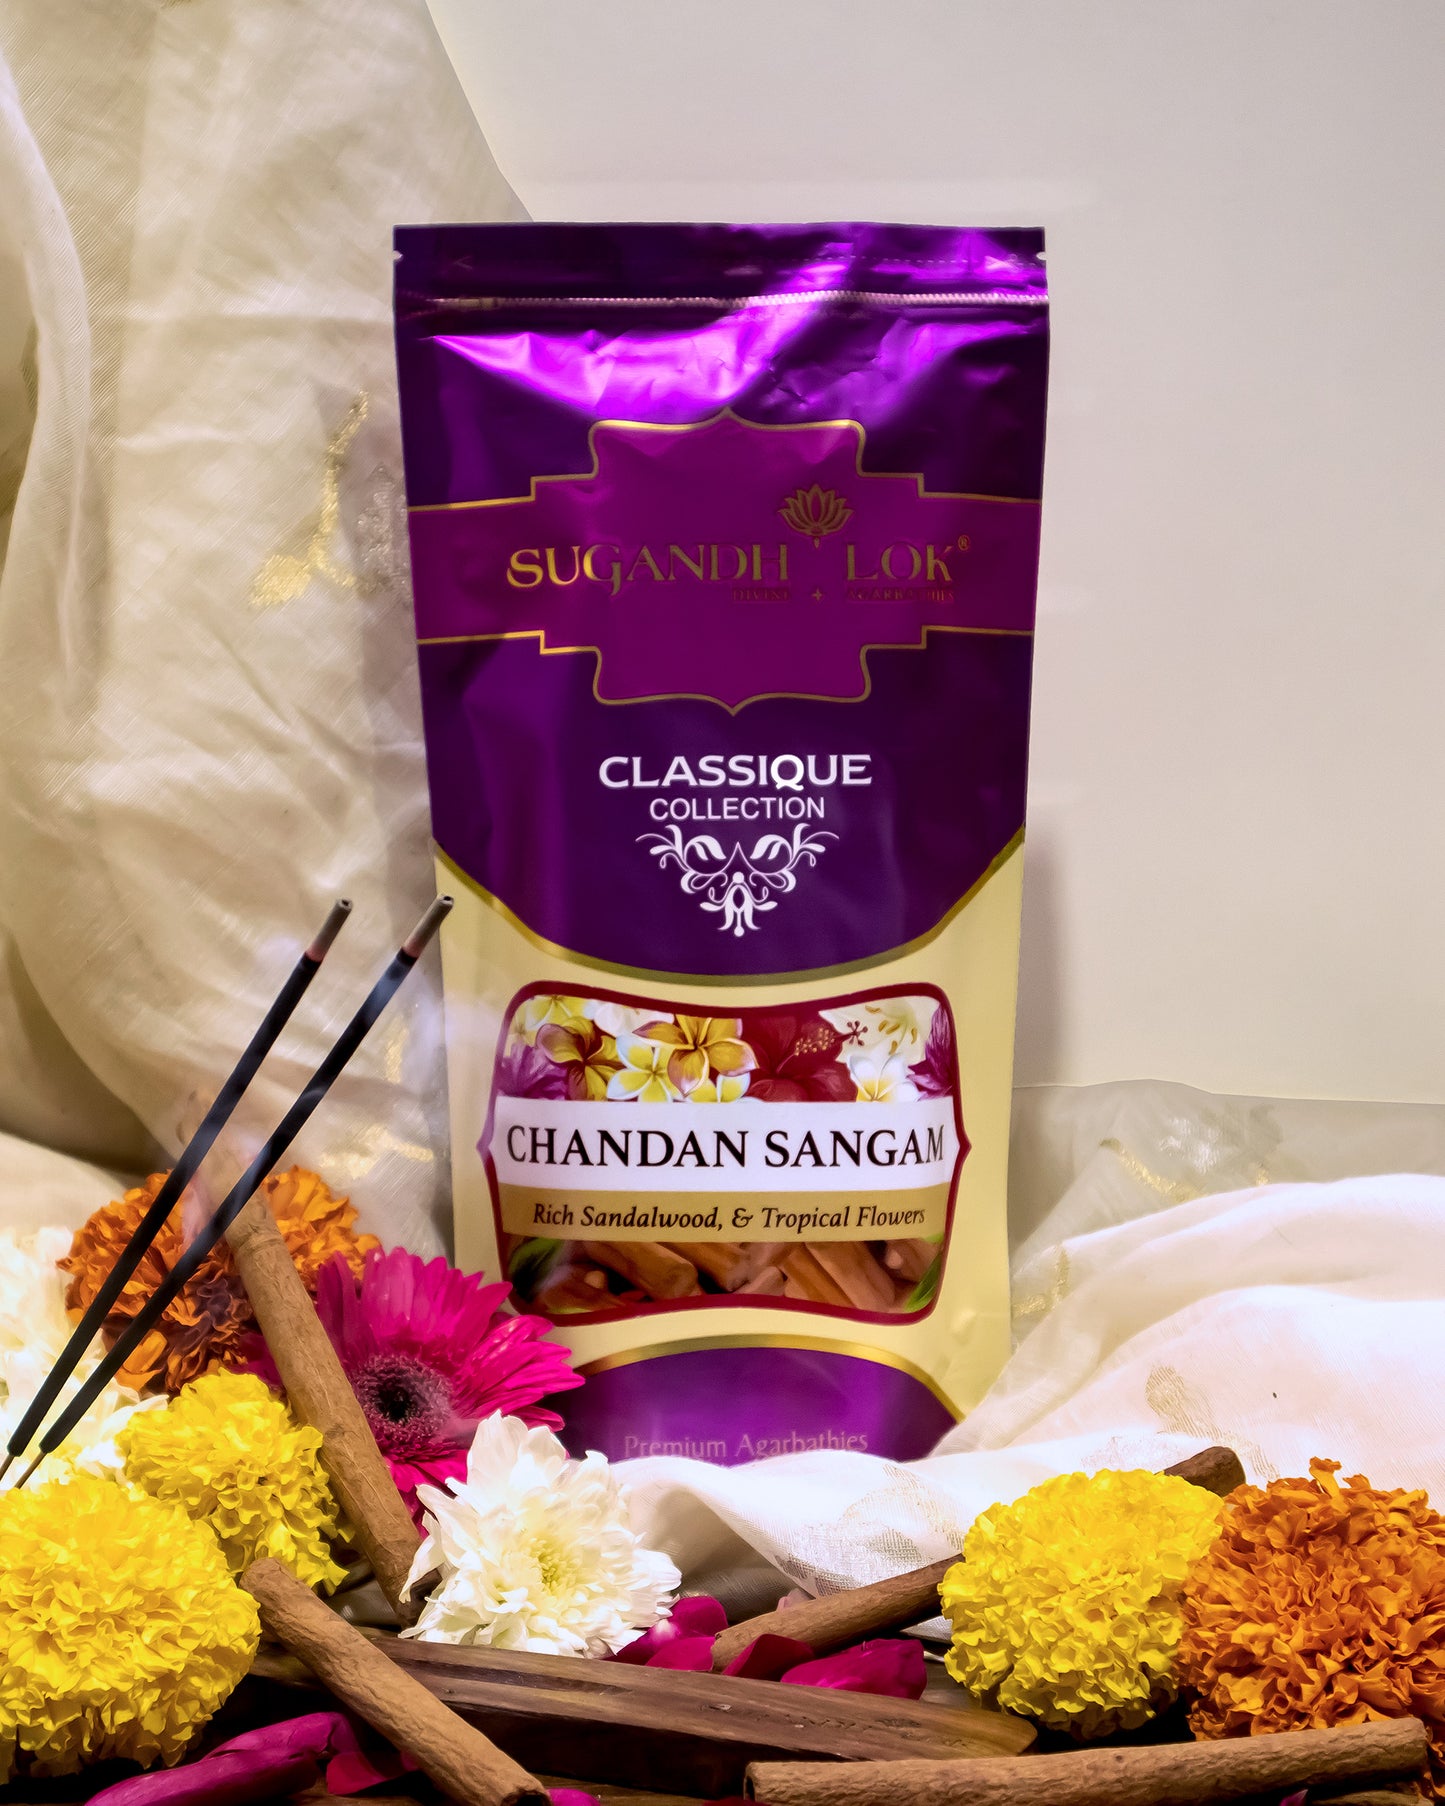 Chandan Sangam Agarbatti Pouch surrounded by flowers and chandan